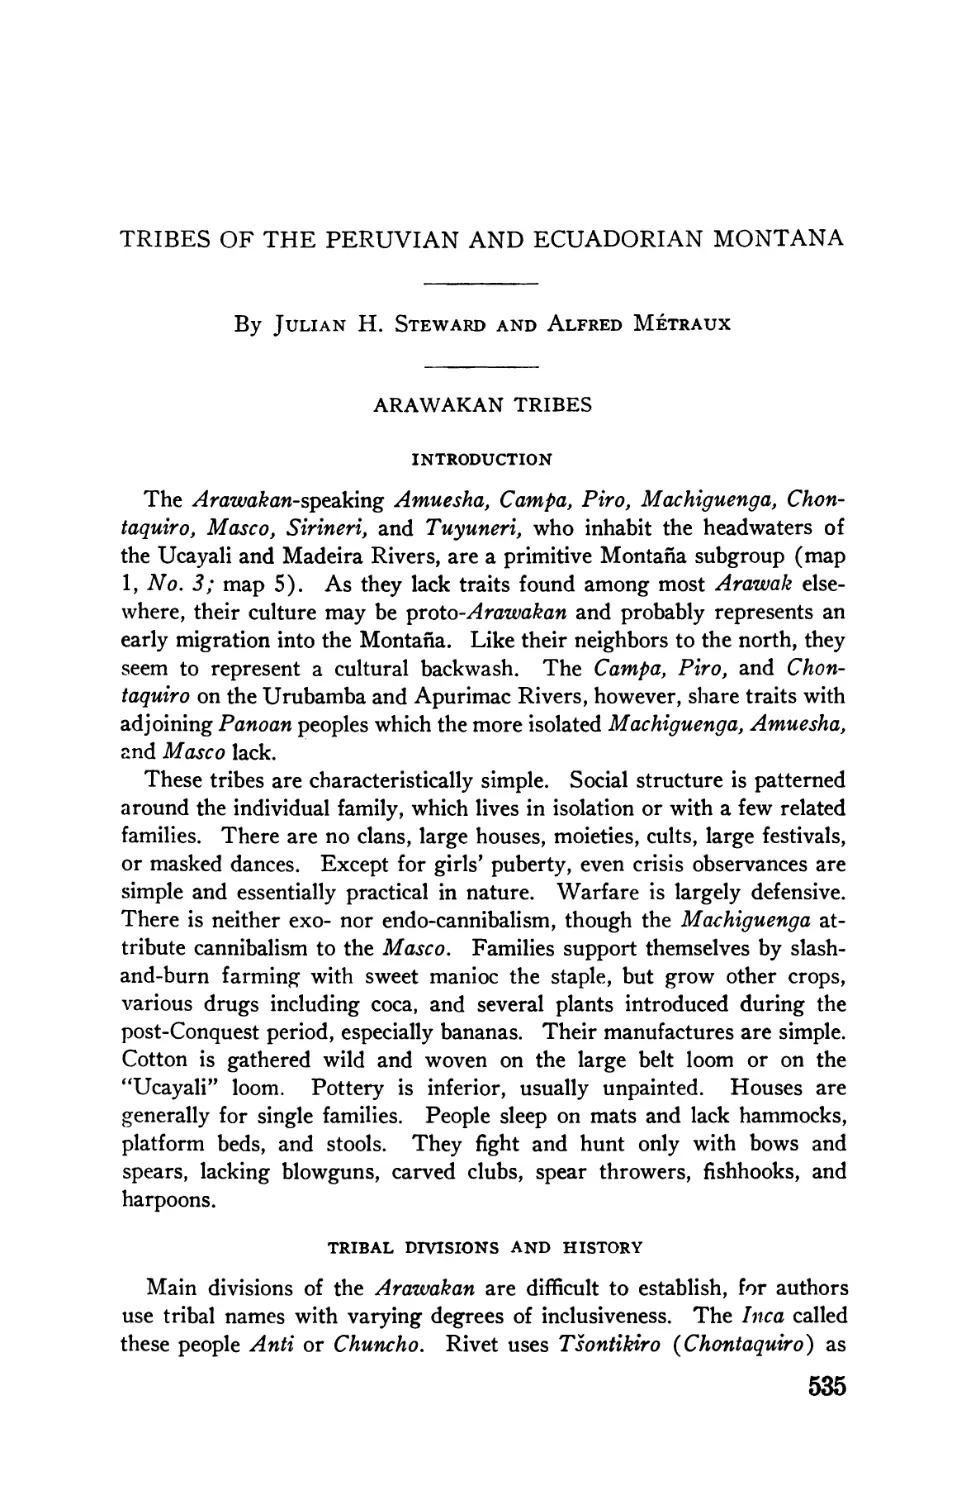 Tribes of the Peruvian and Ecuadorian Montaña, by Julian H. Steward and Alfred Métraux
Tribal divisions and history